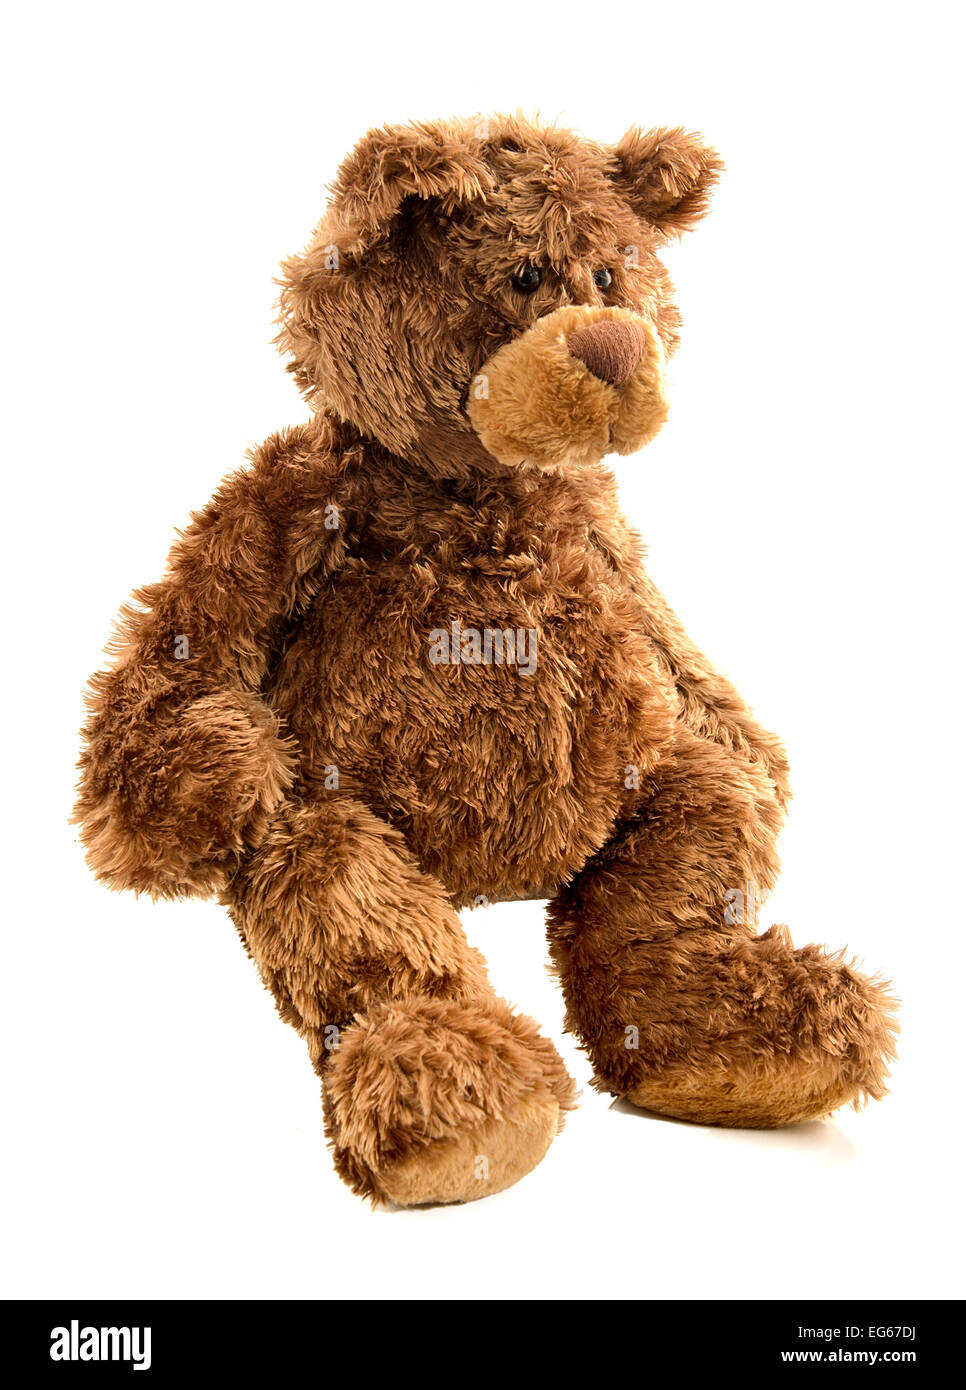 cut out image of soft teddy bear toy Stock Photo